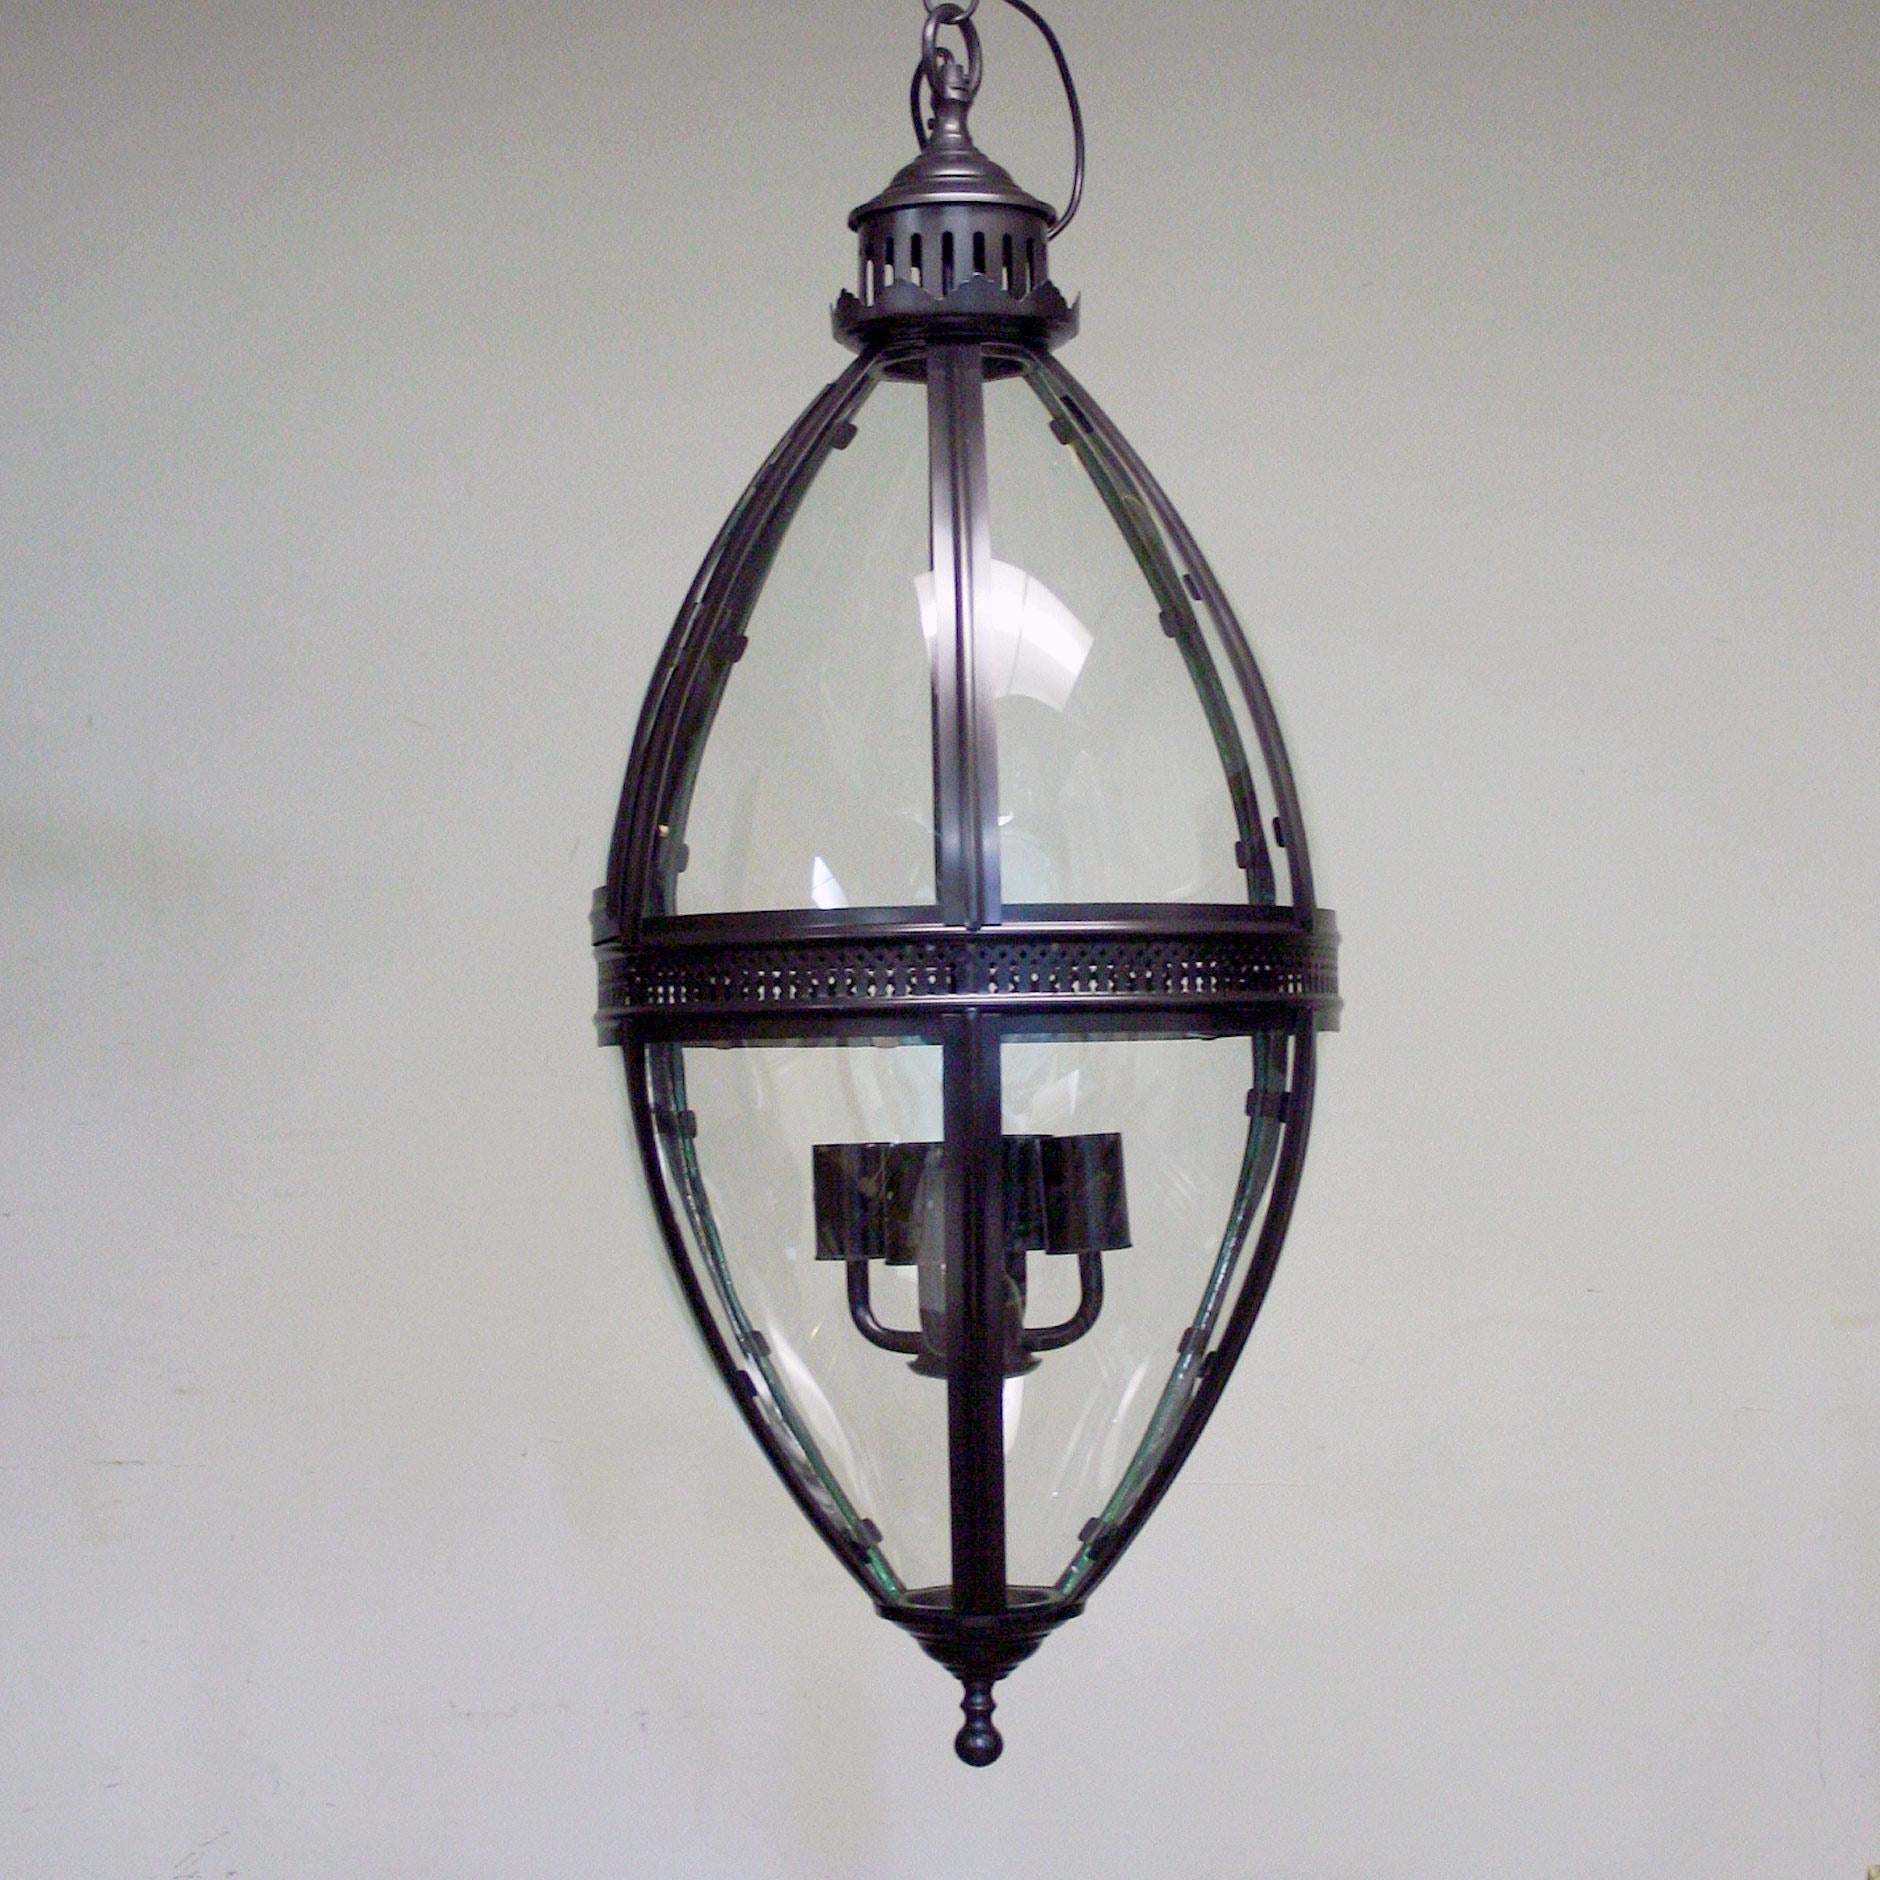 A reproduction oval shaped hanging lantern with curved glass panels, comes in a black and brass colored finish.

Have 4 of each color in stock so would work perfectly for a bar/restaurant project or great as a single piece for an interior